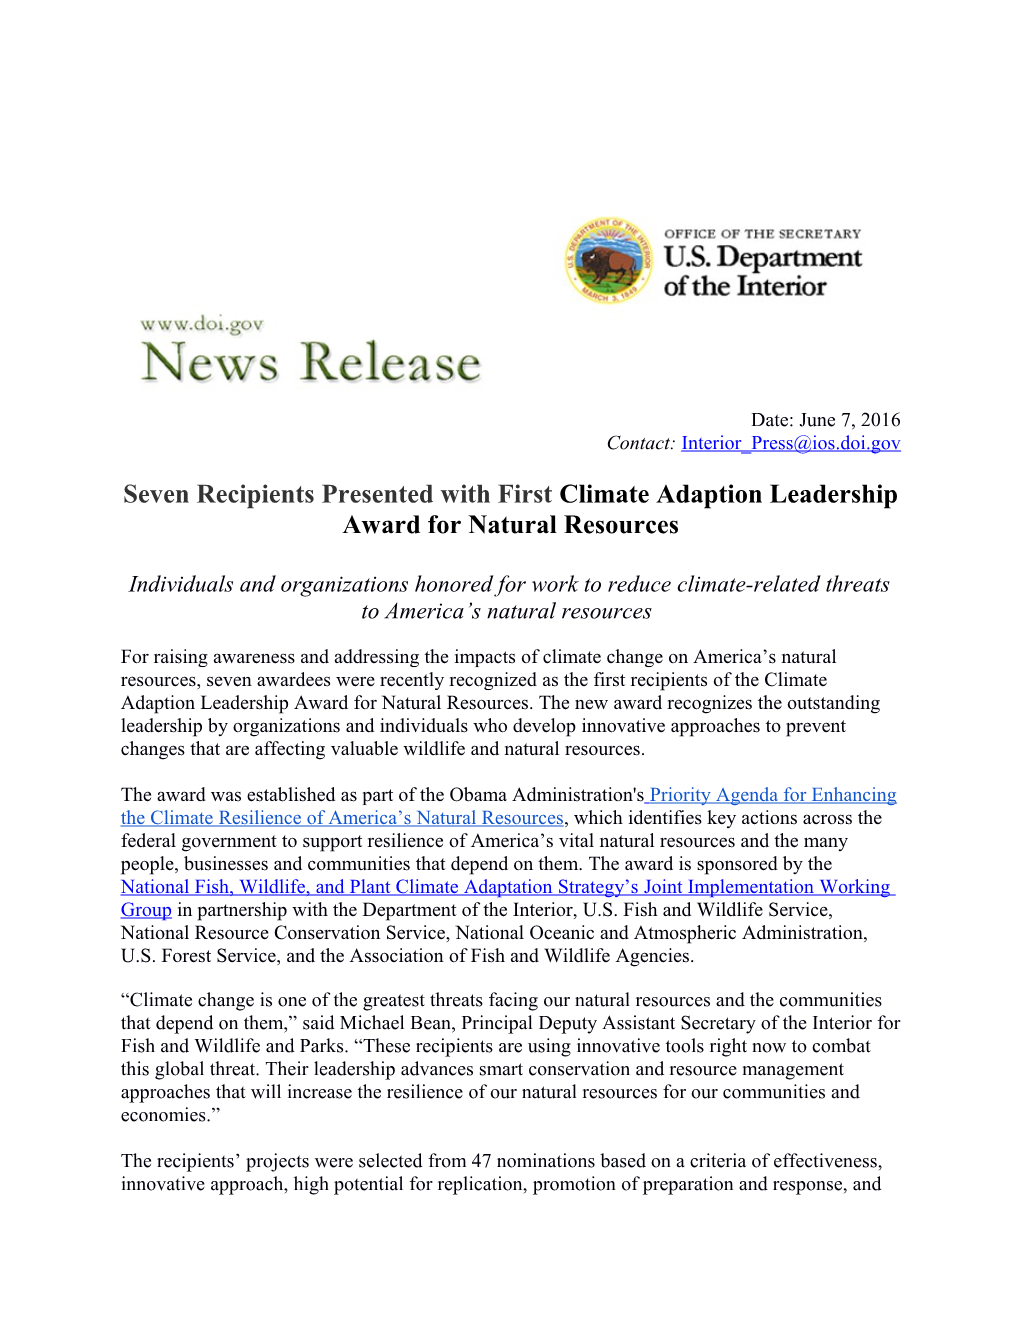 Seven Recipients Presented with First Climate Adaption Leadership Award for Natural Resources